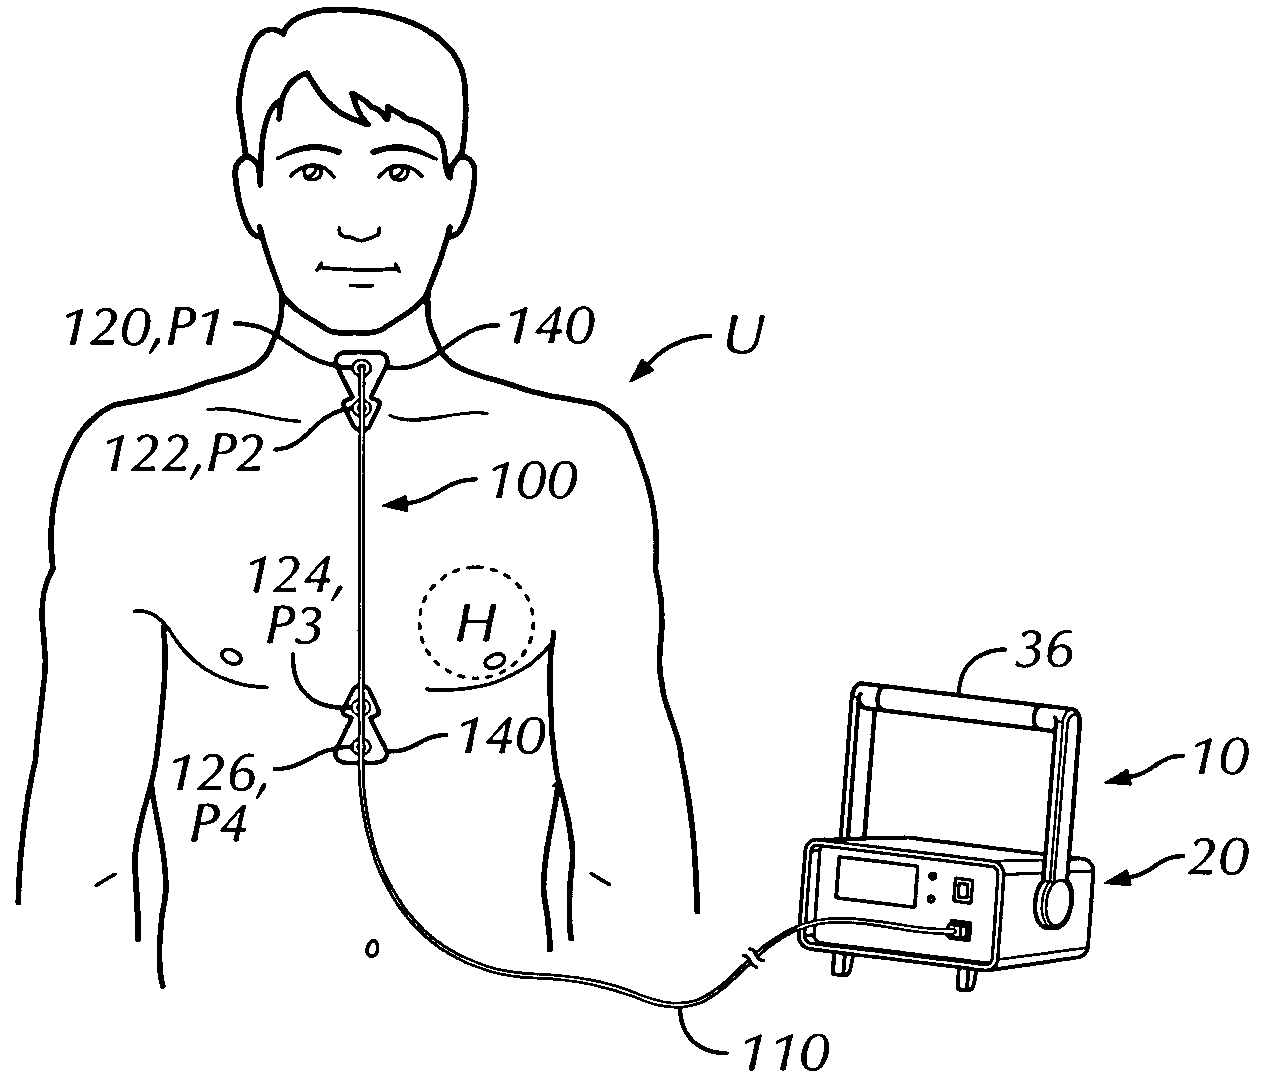 Thoracic impedance monitor and electrode array and method of use